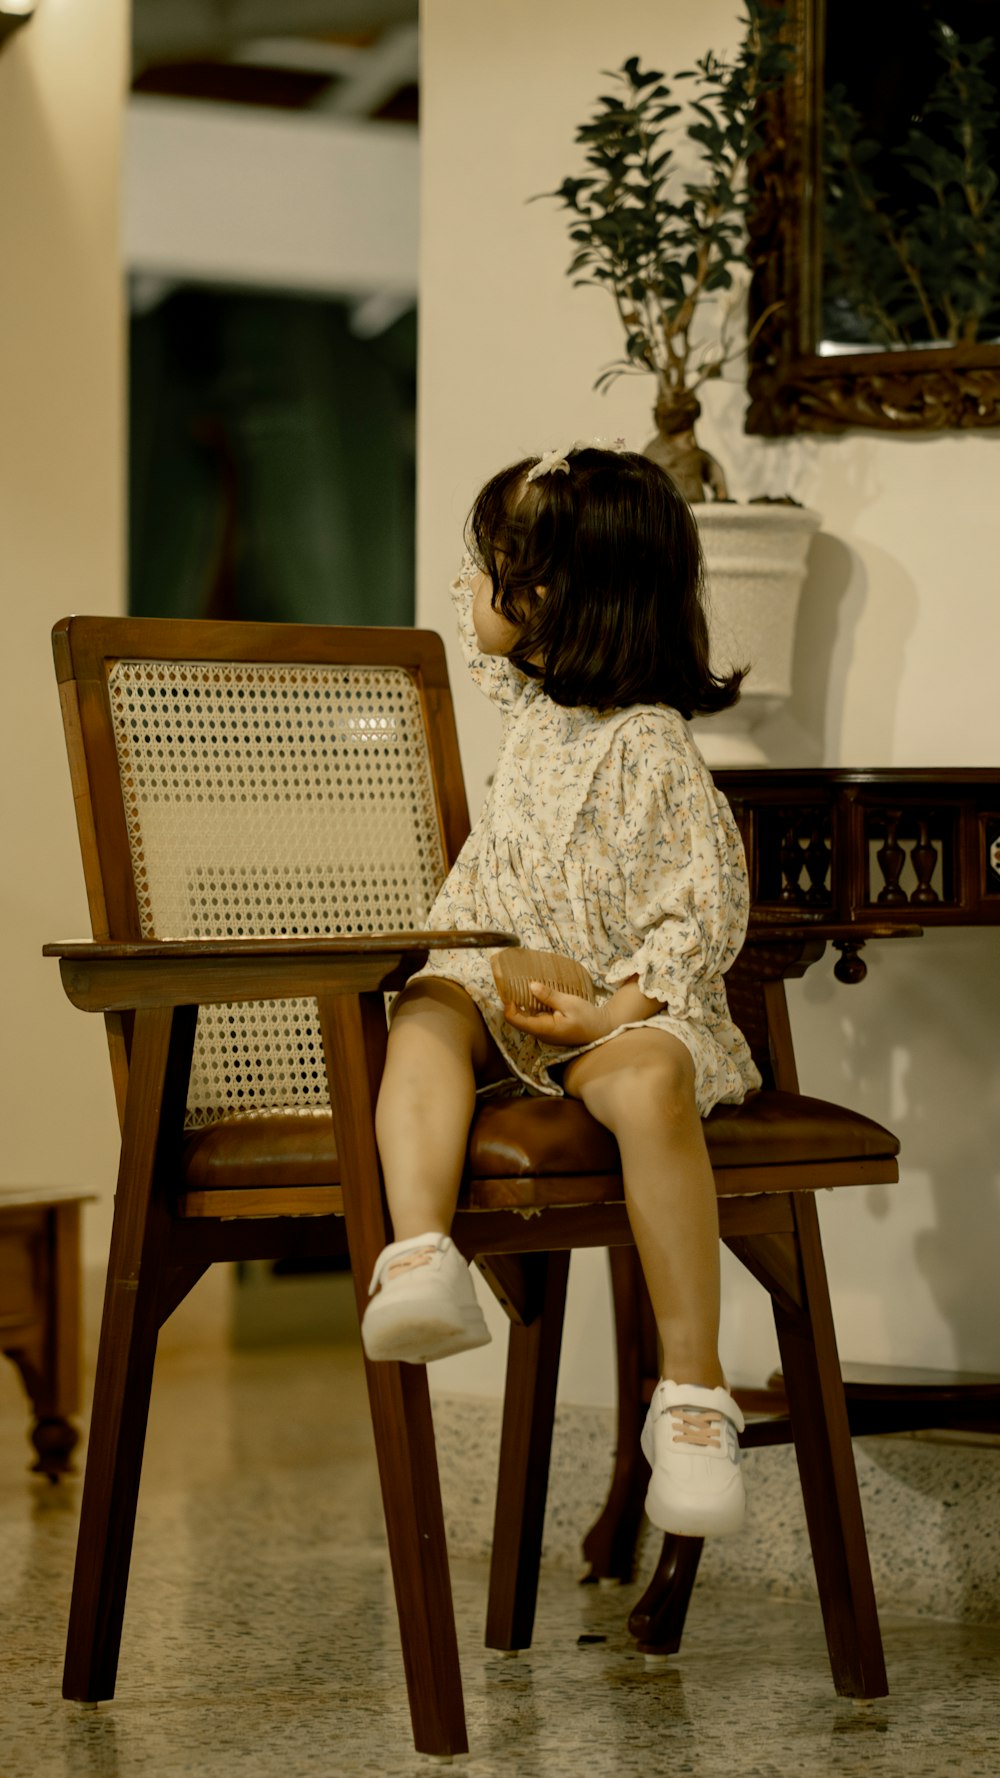 a little girl sitting on a wooden chair